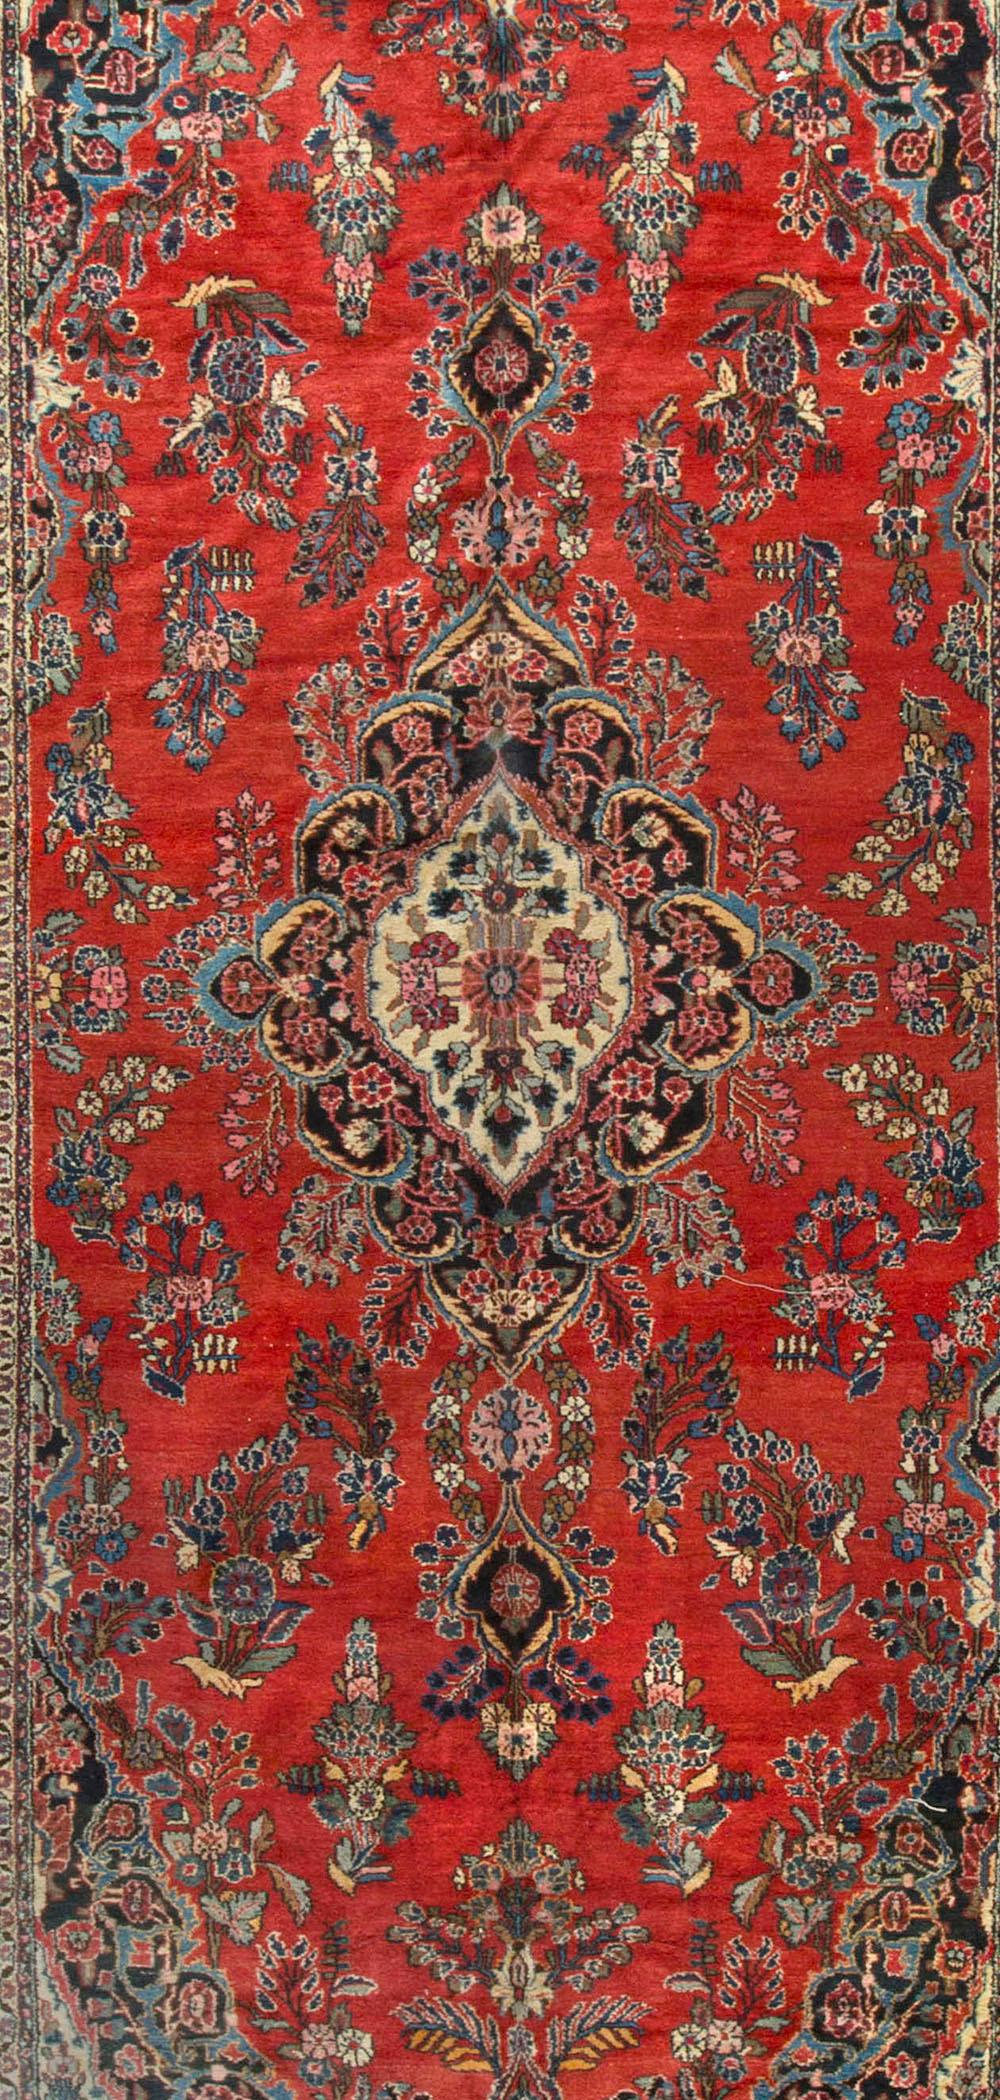 Hand-Woven Vintage Oversize Persian Red Blue Kazvin Rug, circa 1940 9' x  19'2 For Sale